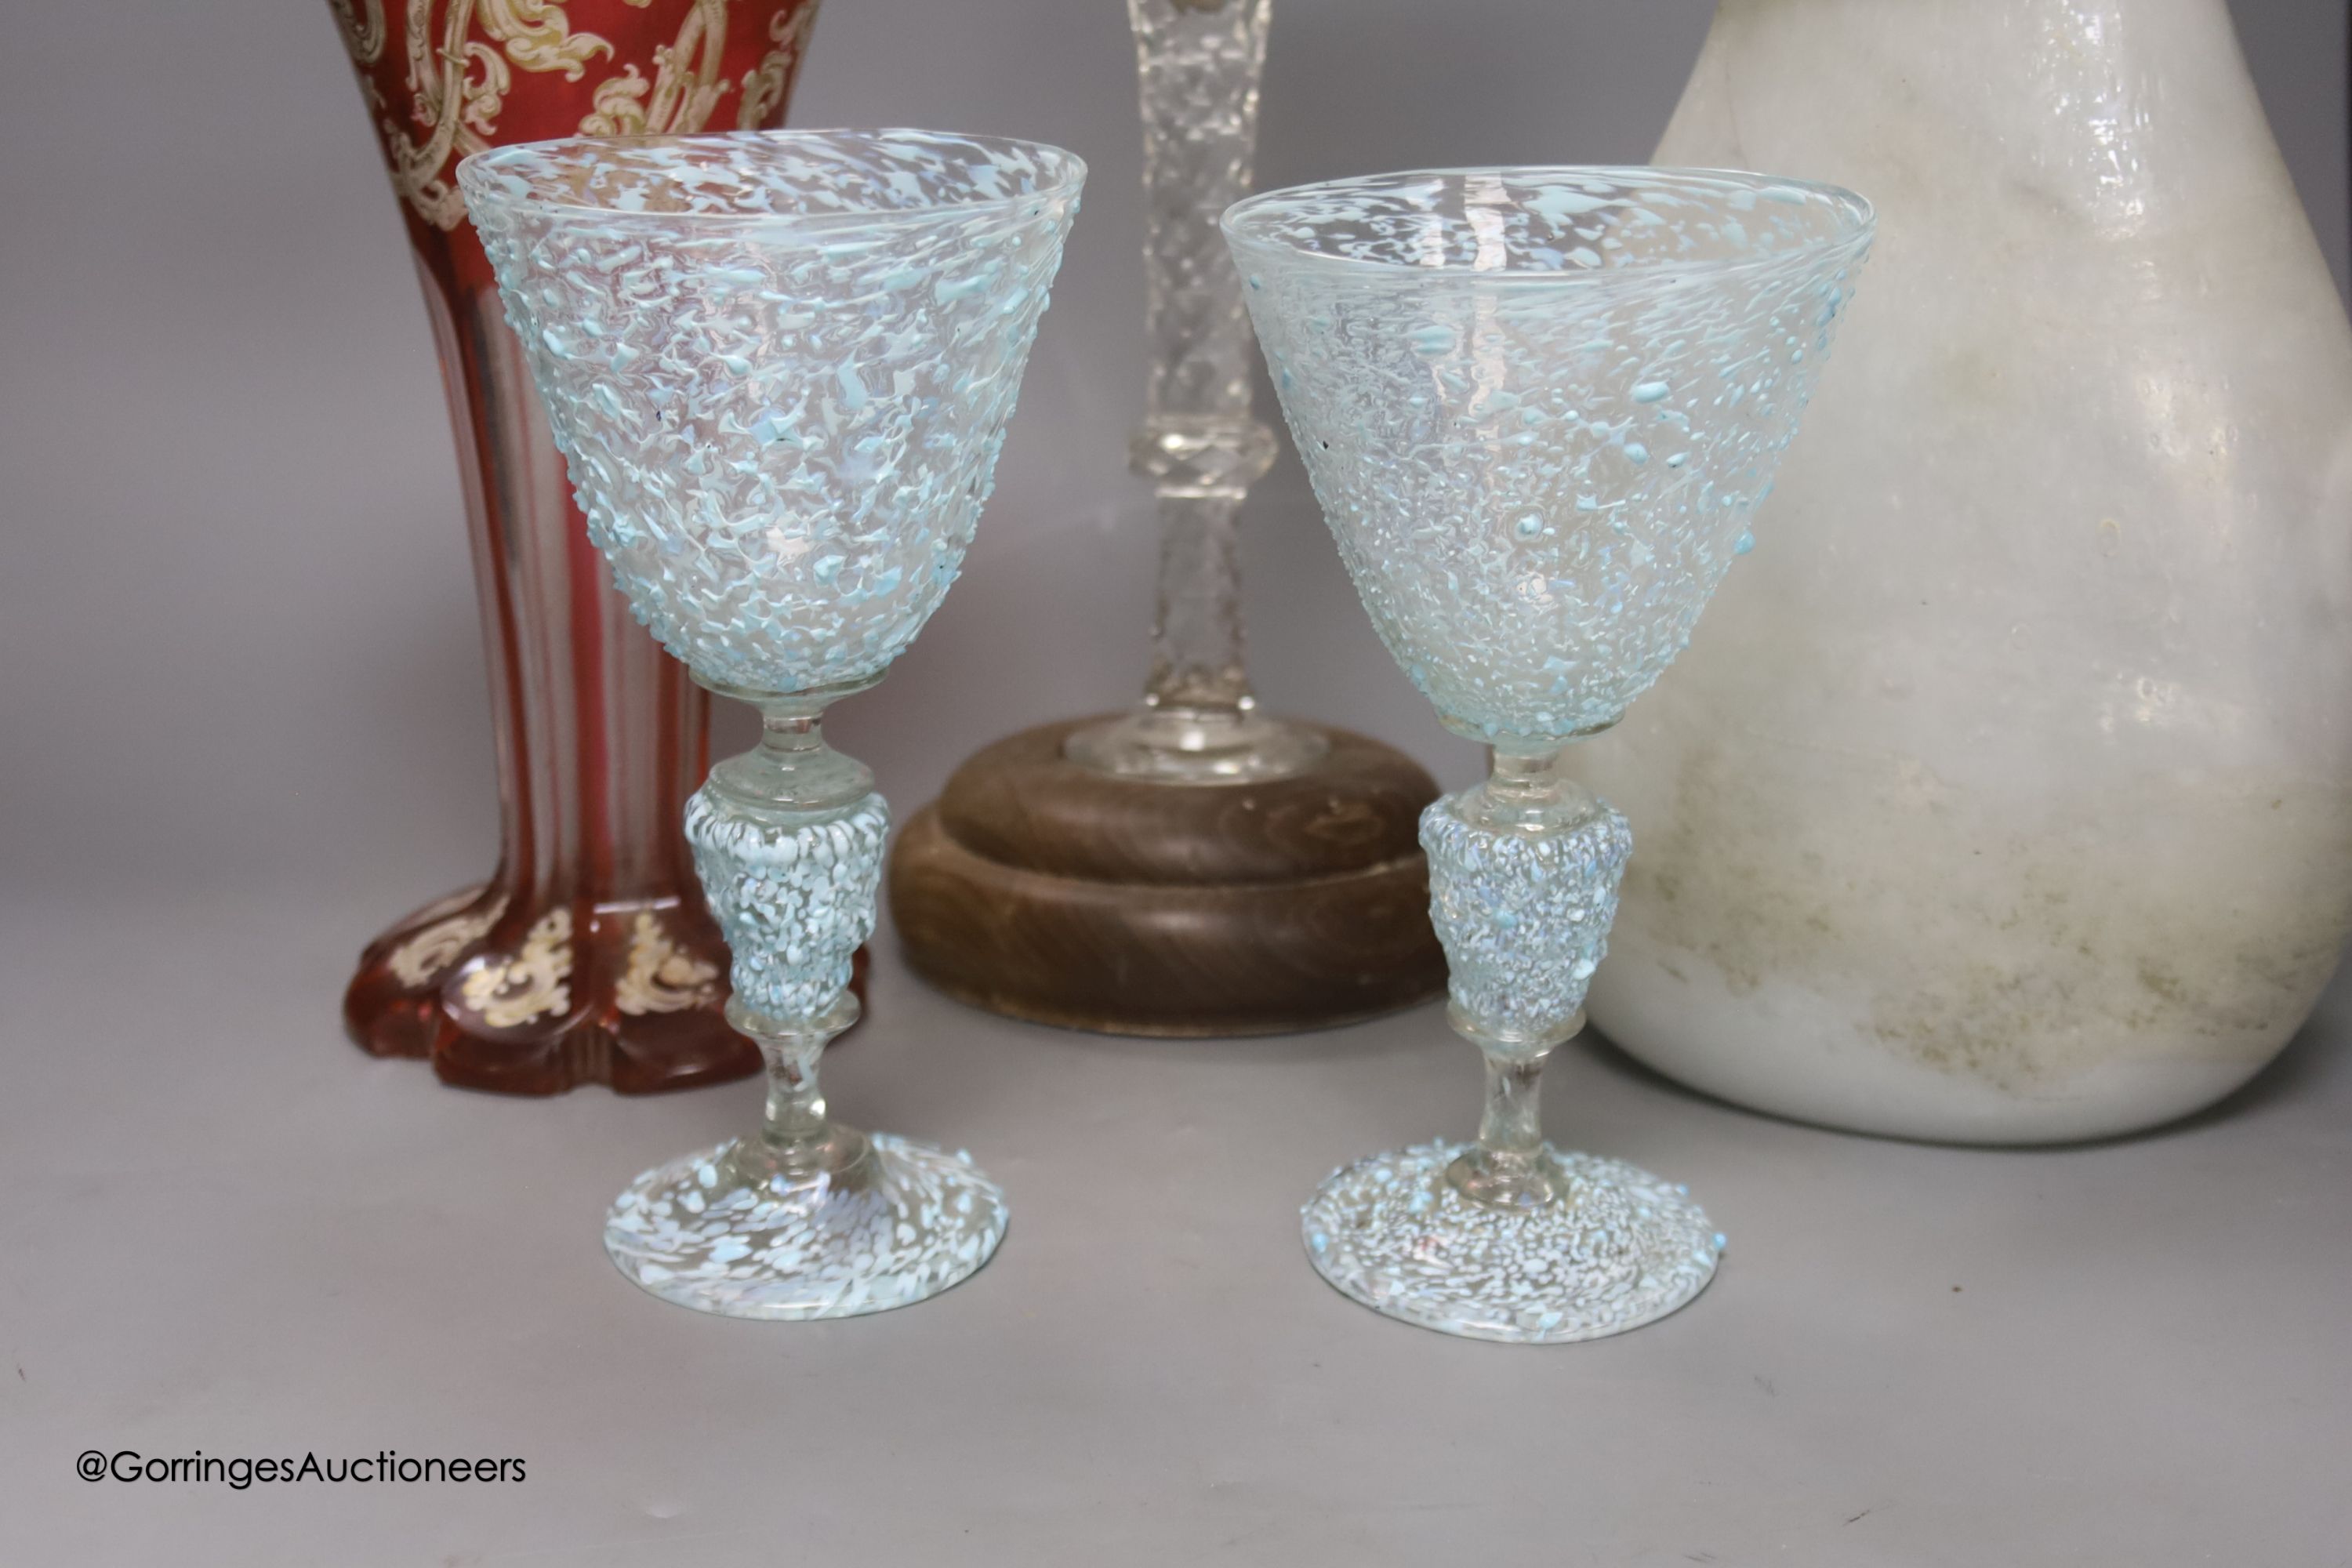 Roman style vase, a pair of goblets, a Bohemian trumpet vase, cut glass vase on stand and a German enamel tinted glass